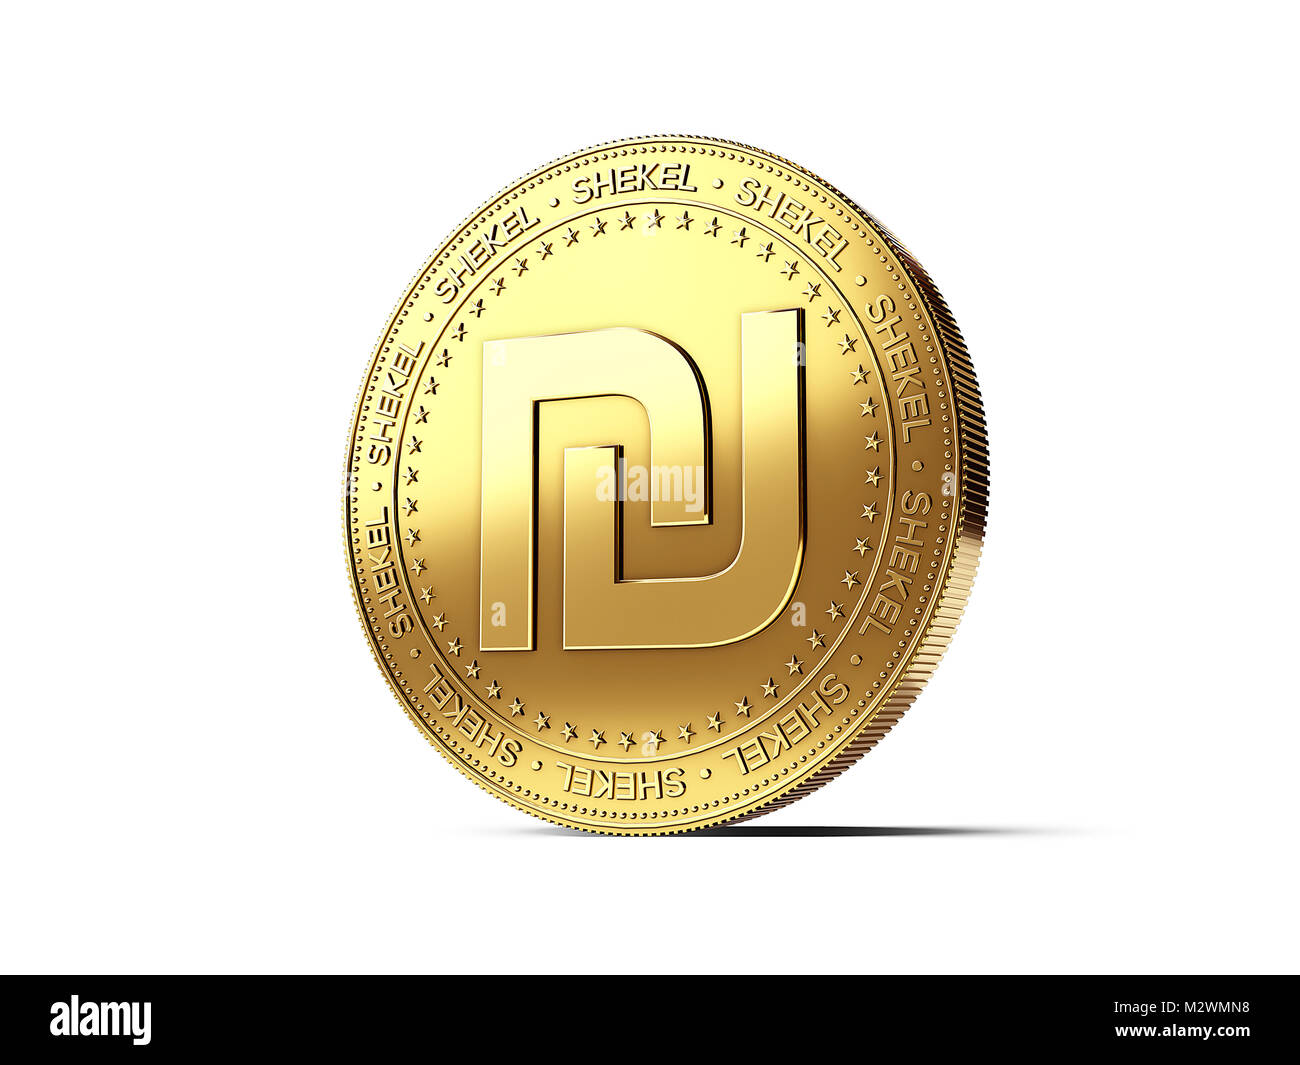 Shekel sign on golden coin. Photo realistic 3D rendering isolated on white background Stock Photo